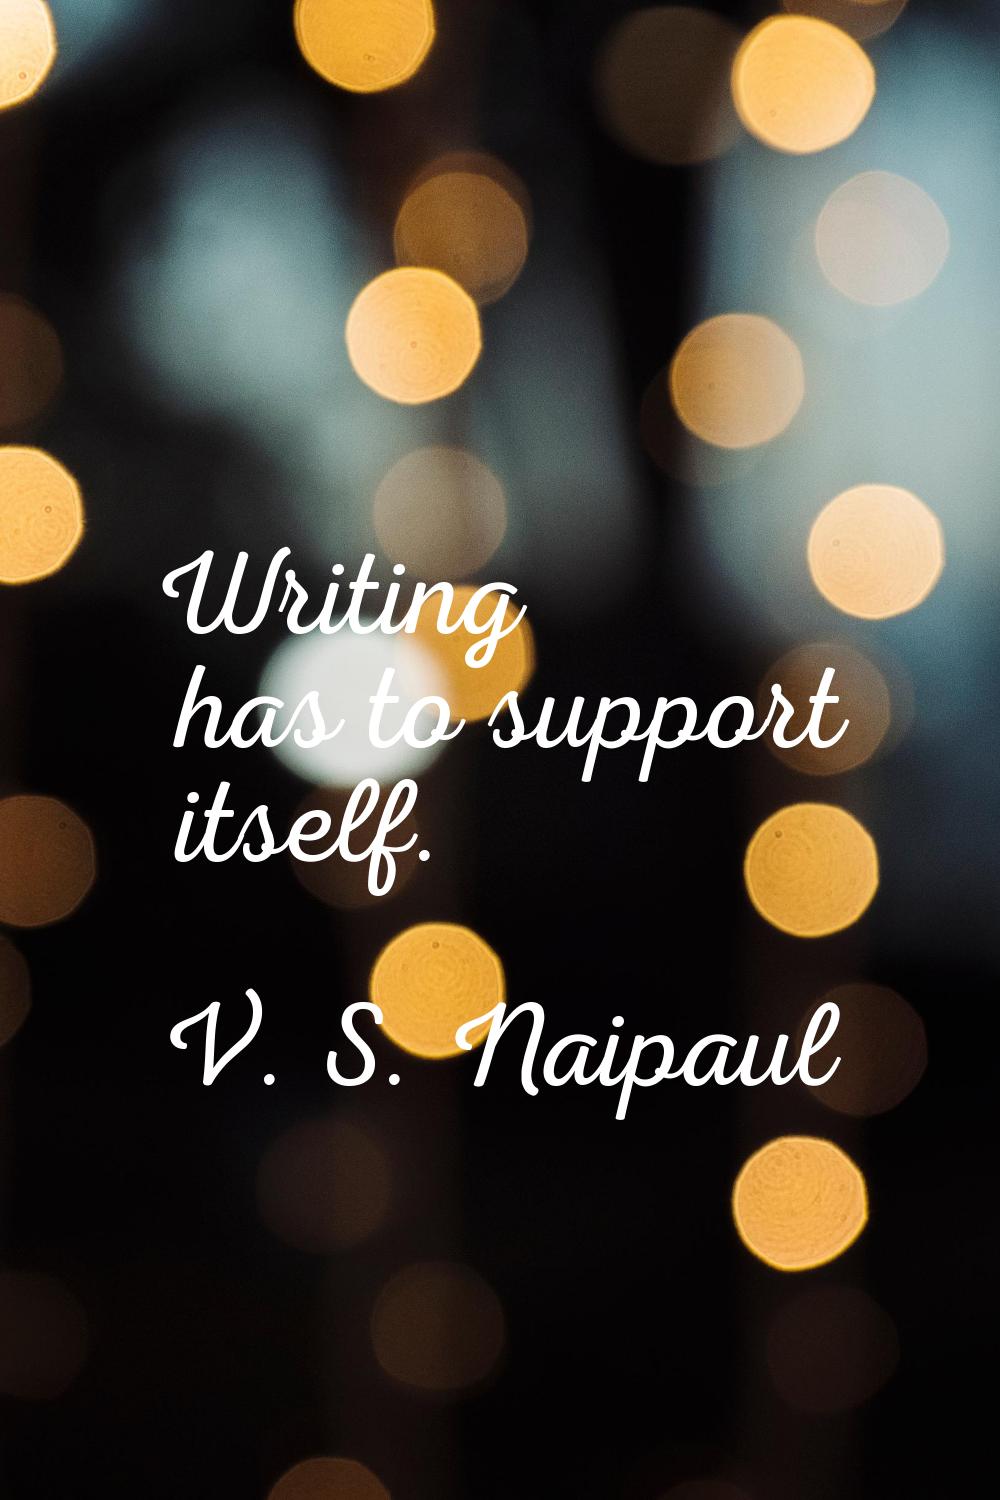 Writing has to support itself.